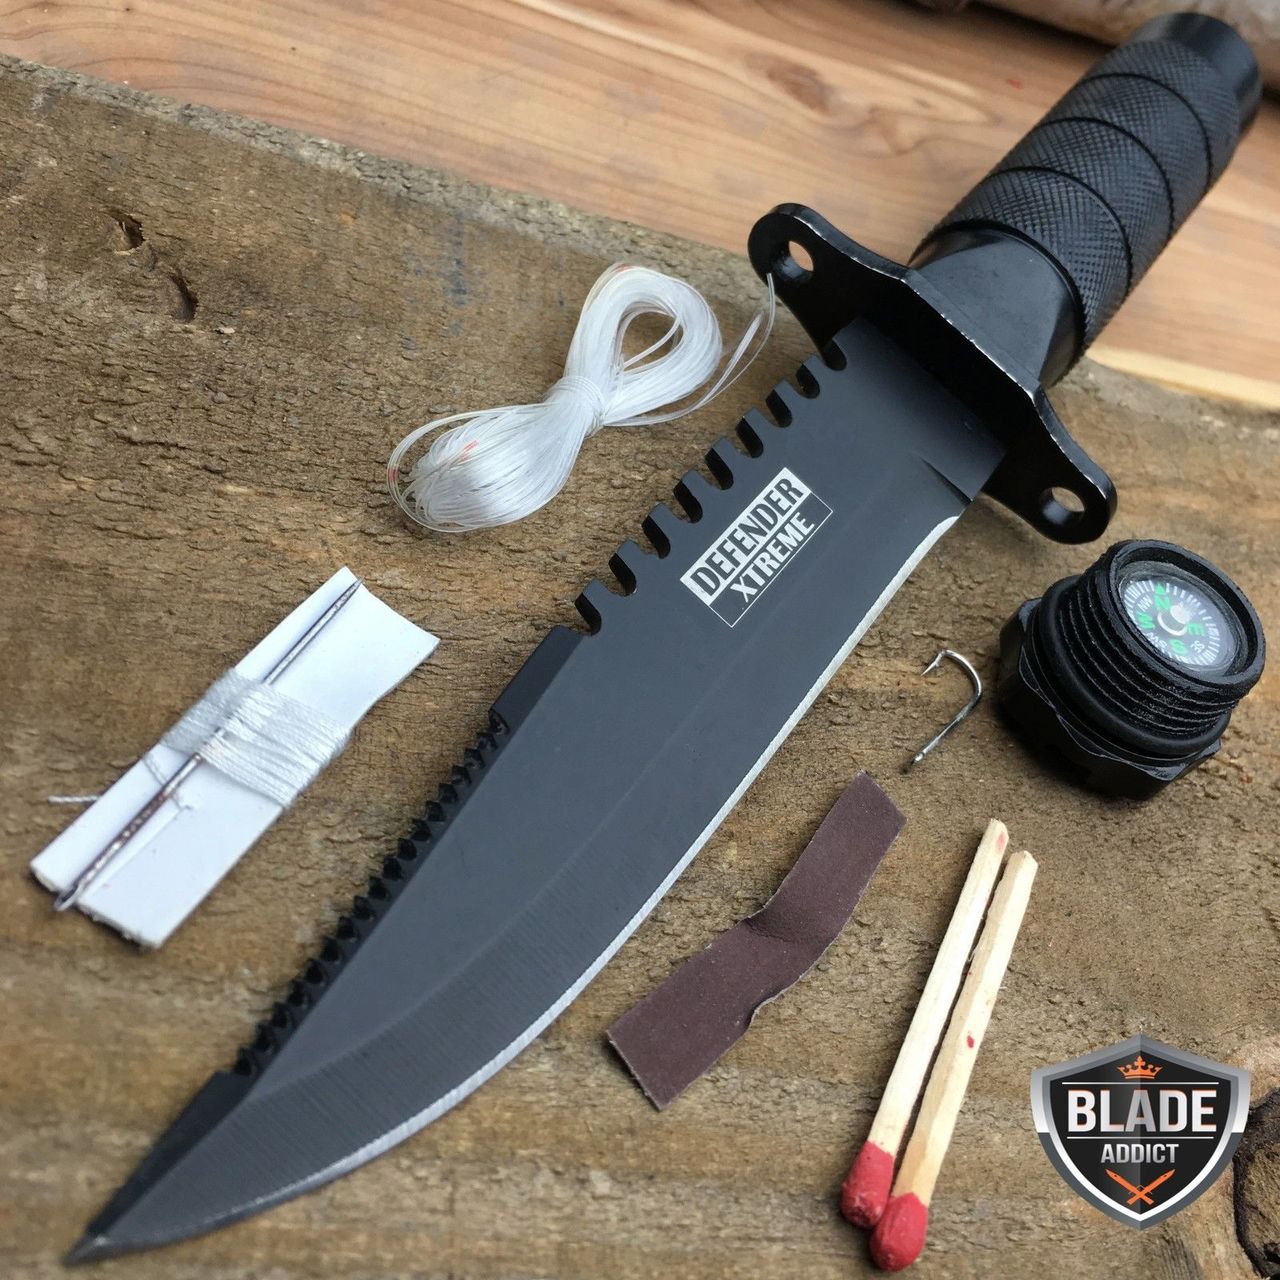 9" Full Tang Tactical Hunting Survival Knife w/ Sheath Military Bowie Combat